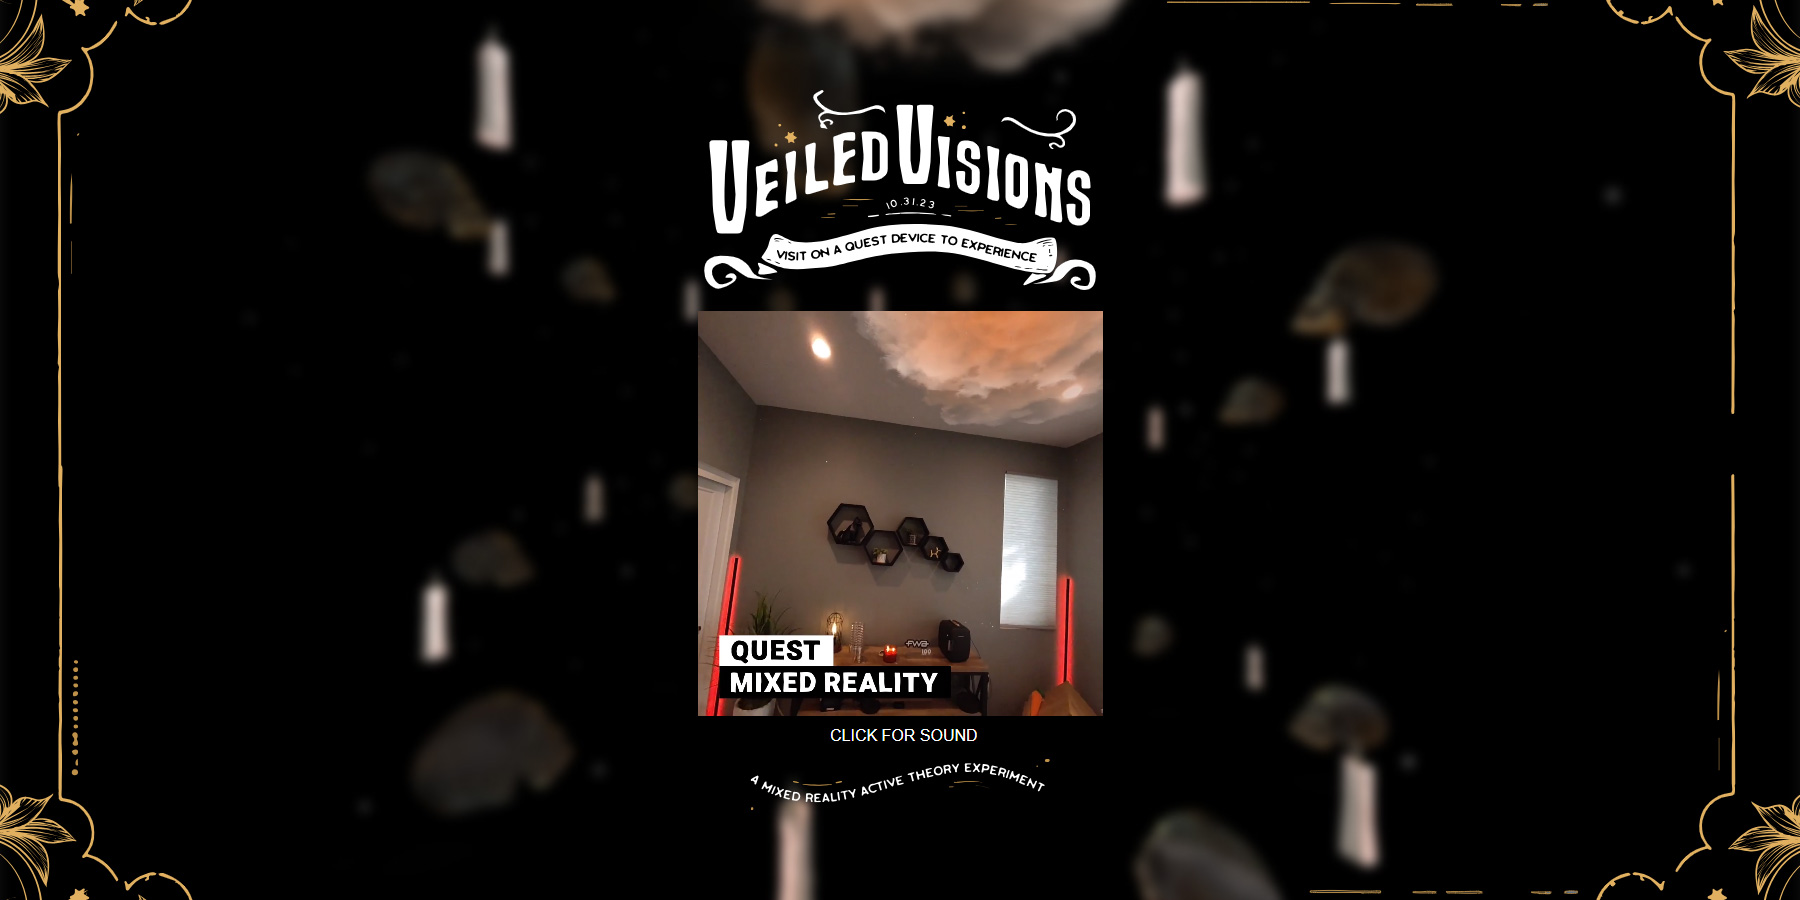 Veiled Visions - Website of the Day